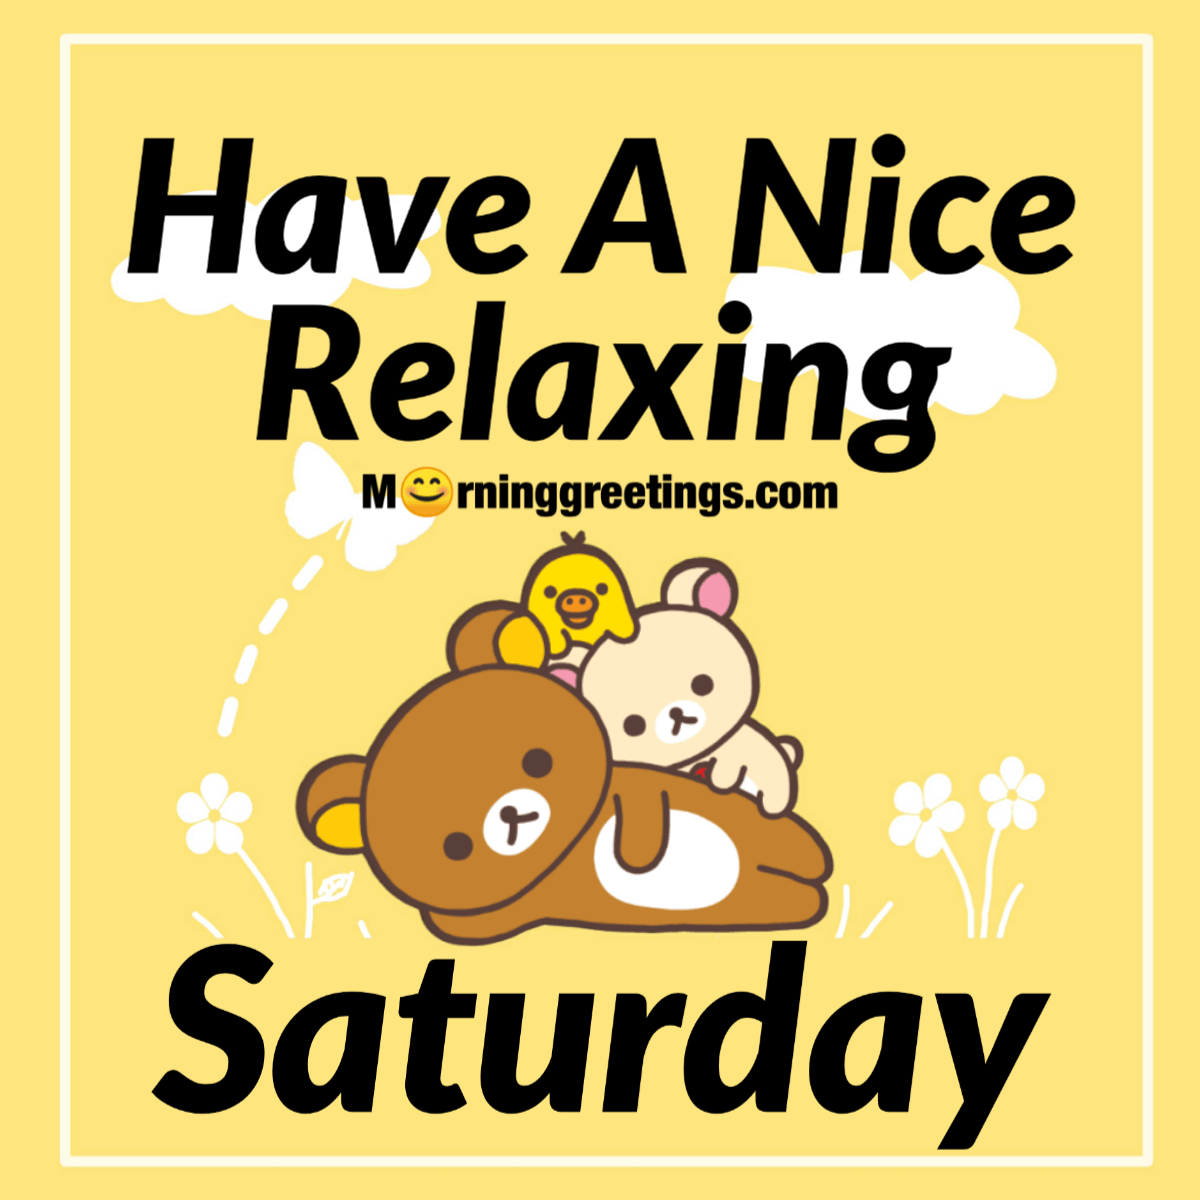 Have A Nice Relaxing Saturday